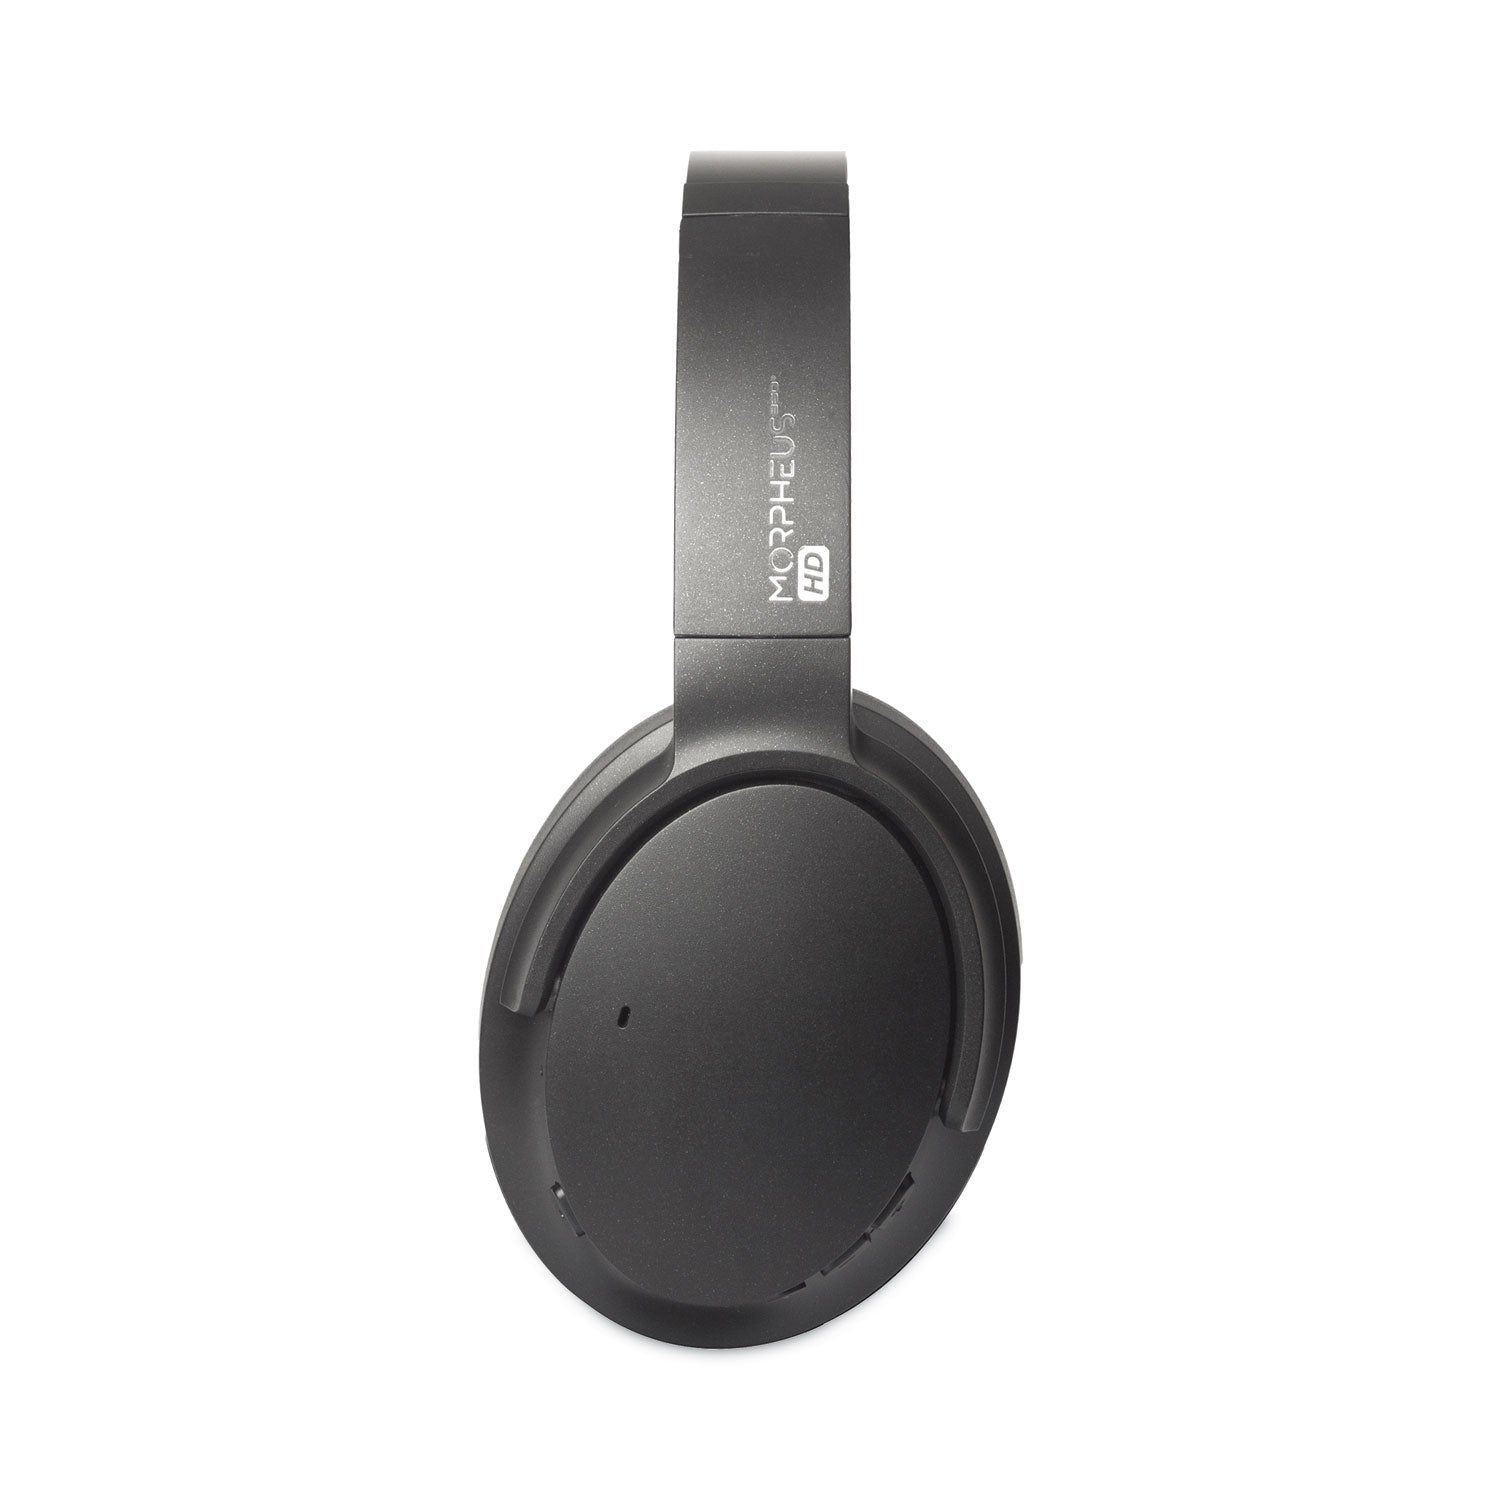 synergy-hd-wireless-noise-cancelling-headphones-bluetooth-headset-with-microphone-4-ft-cord-black_mhshp9550hd - 4